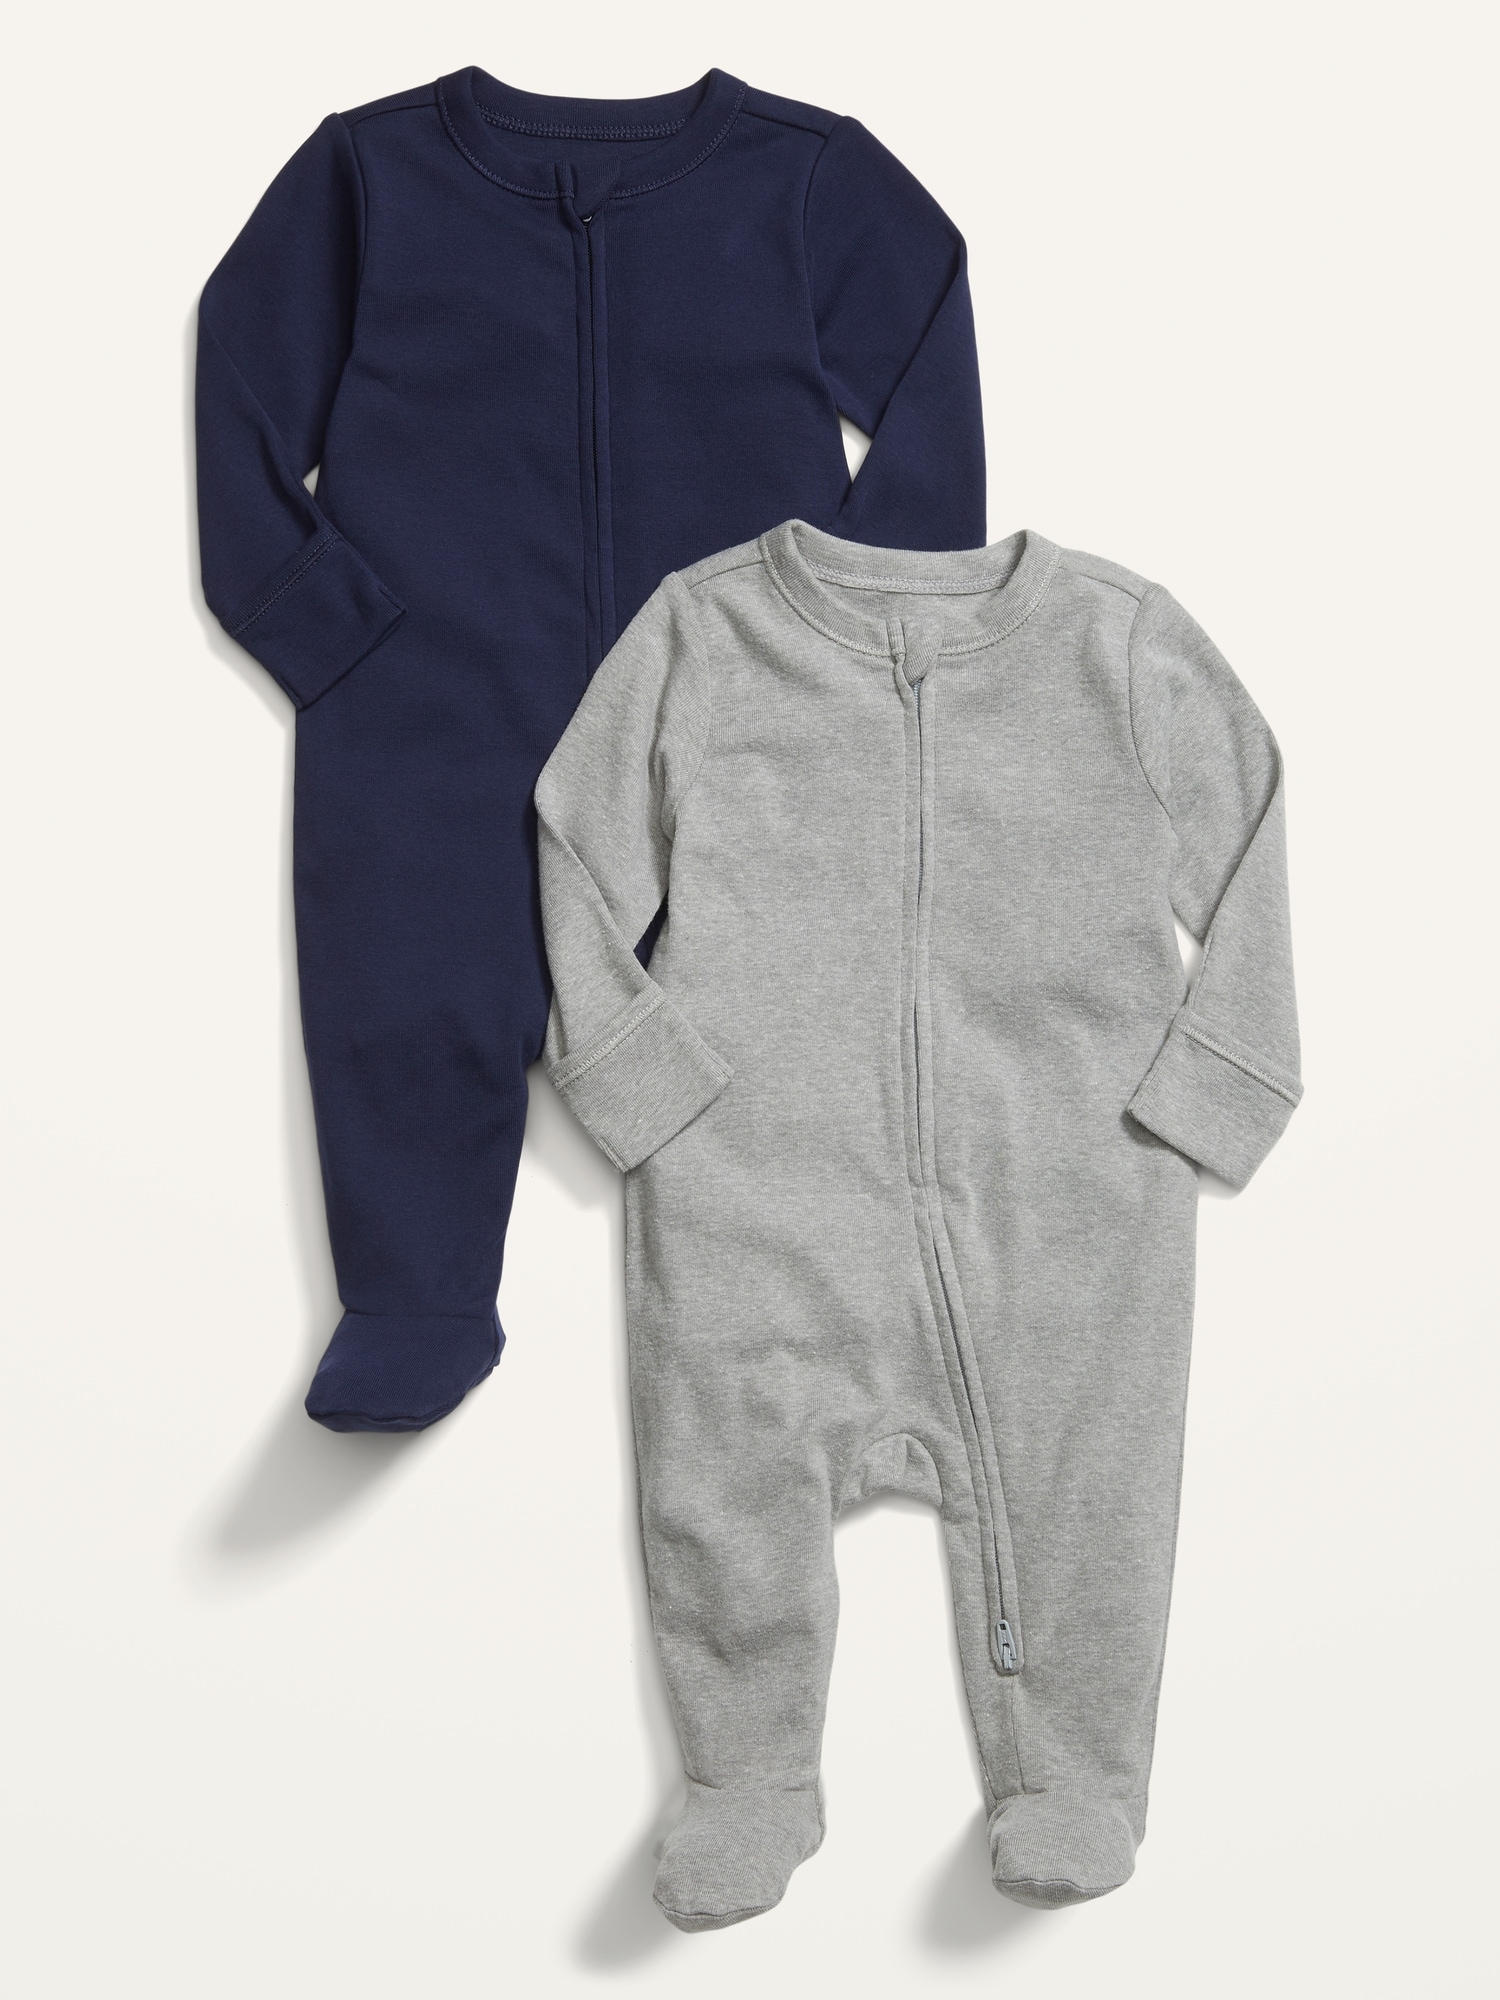 Unisex 2-Way-Zip Sleep & Play Footed One-Piece 2-Pack for Baby | Old Navy